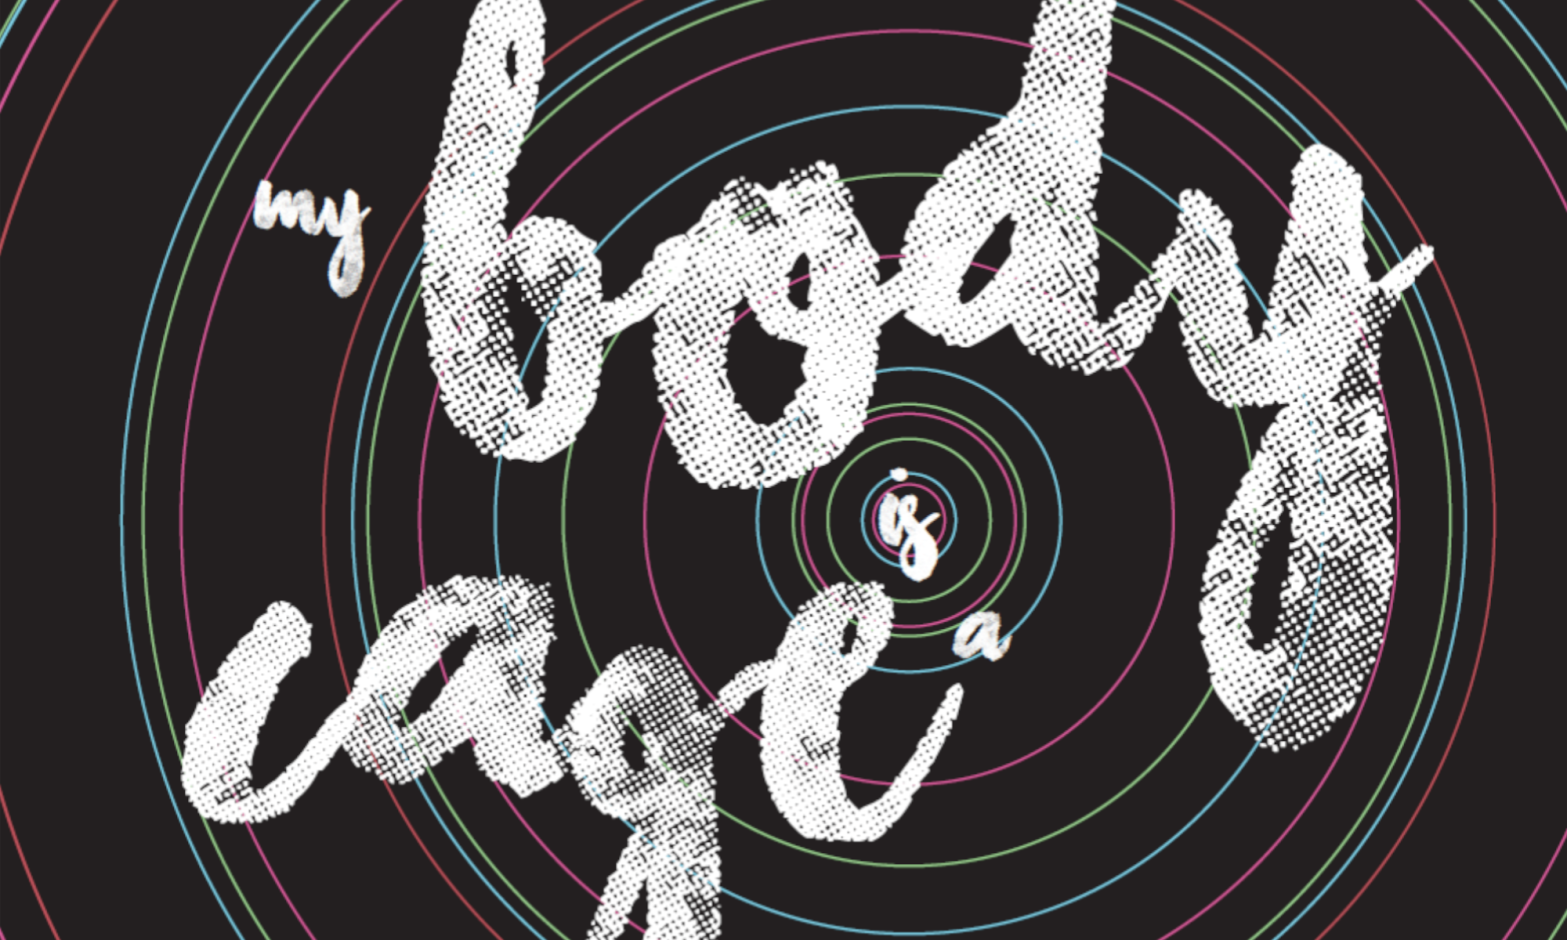 Cover of My Body is a Cage by John Battle. Image © 2021 John Battle. Used with permission.